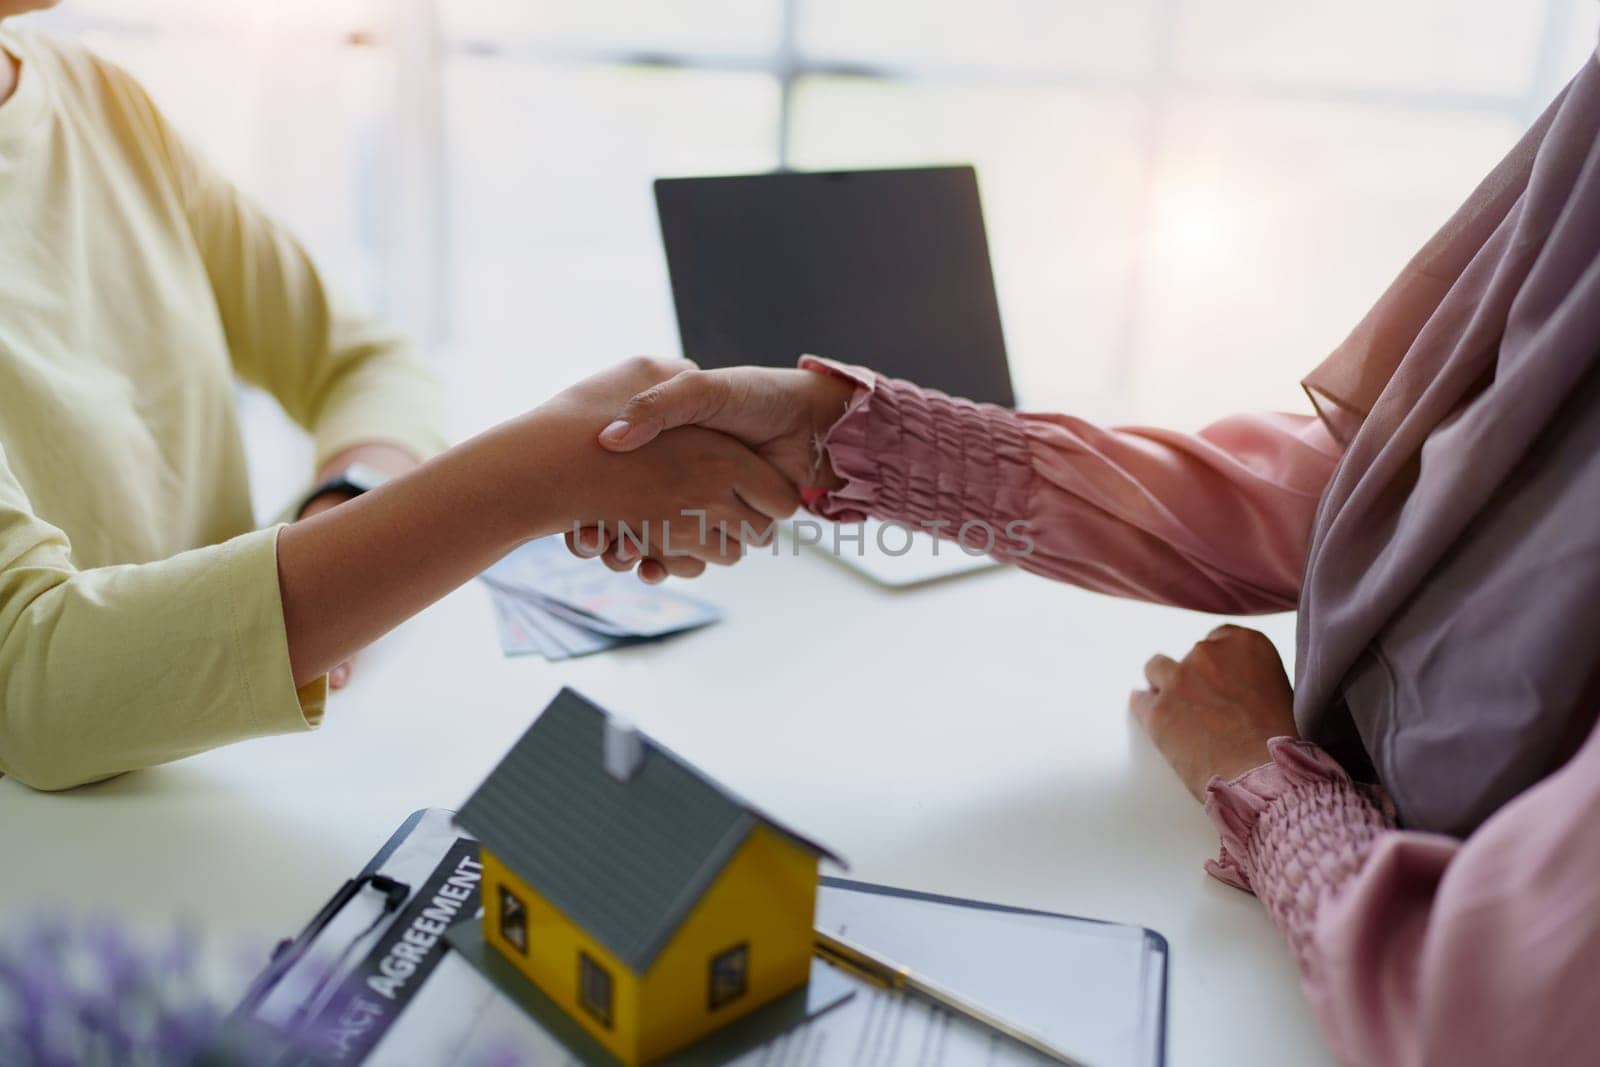 A female Muslim bank employee, holding hands, negotiates a residential loan with a customer